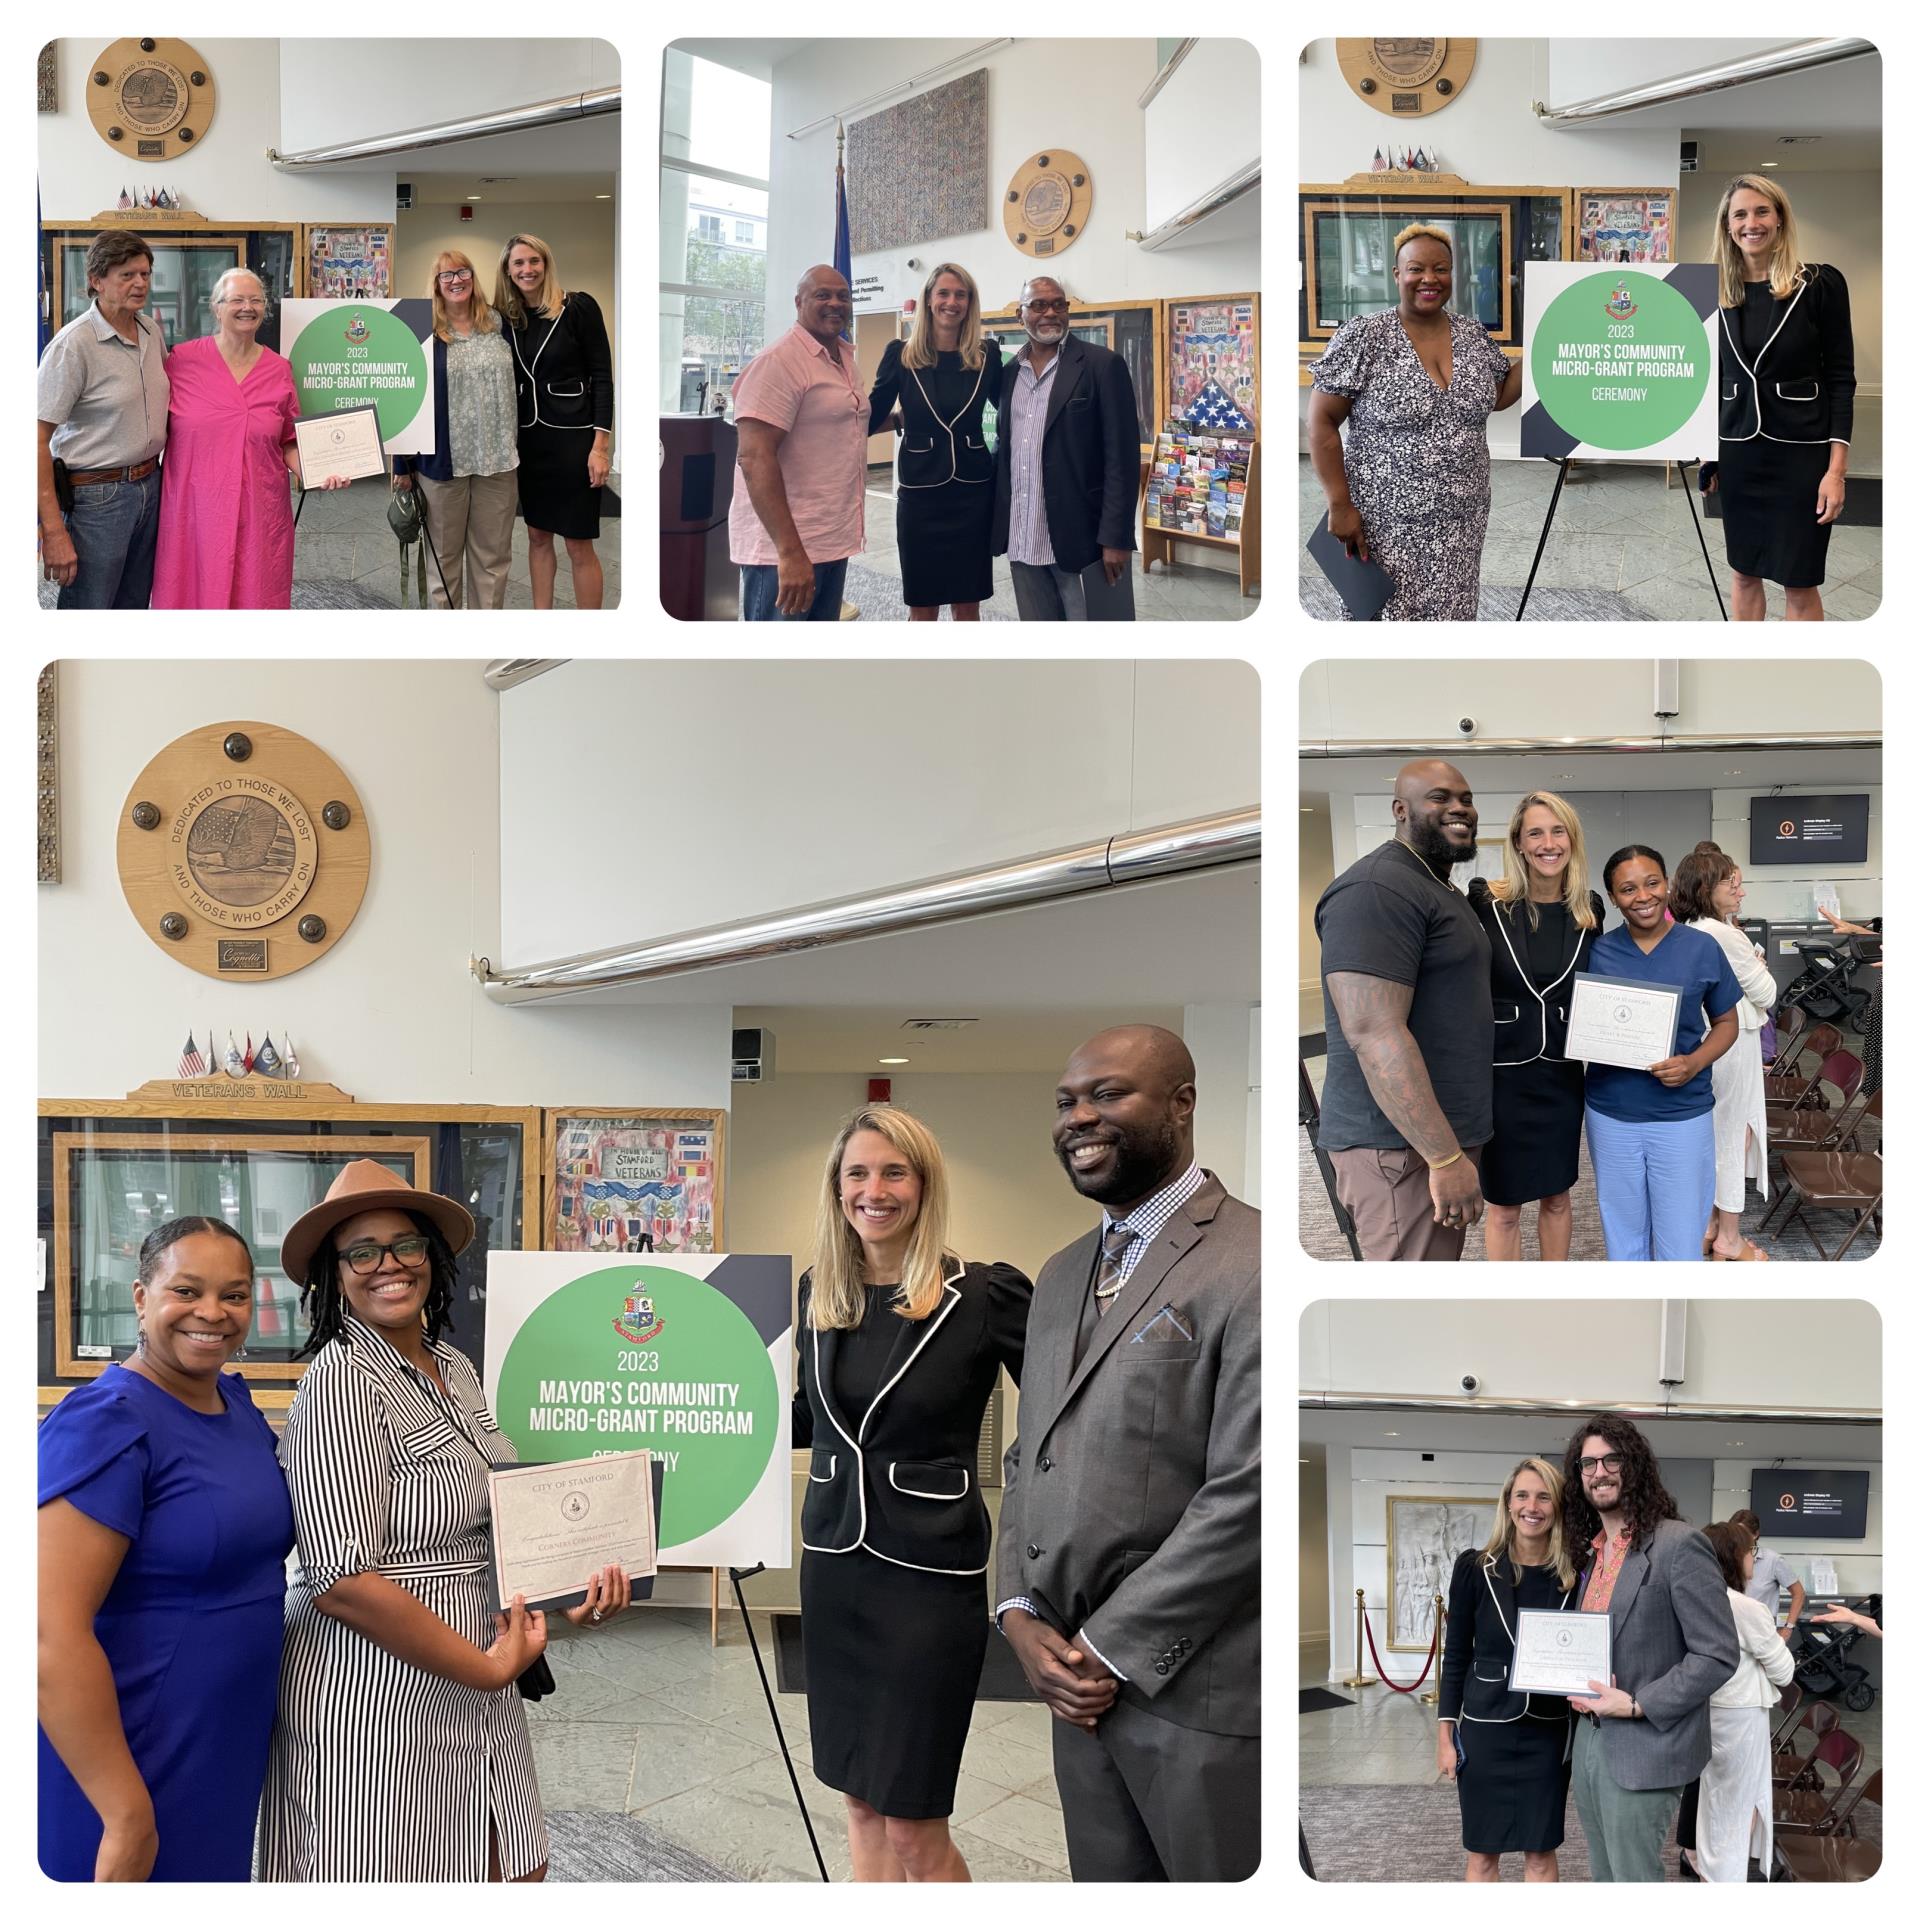 a collage of photos of Mayor Simmons with winners of the mayor's community grant program